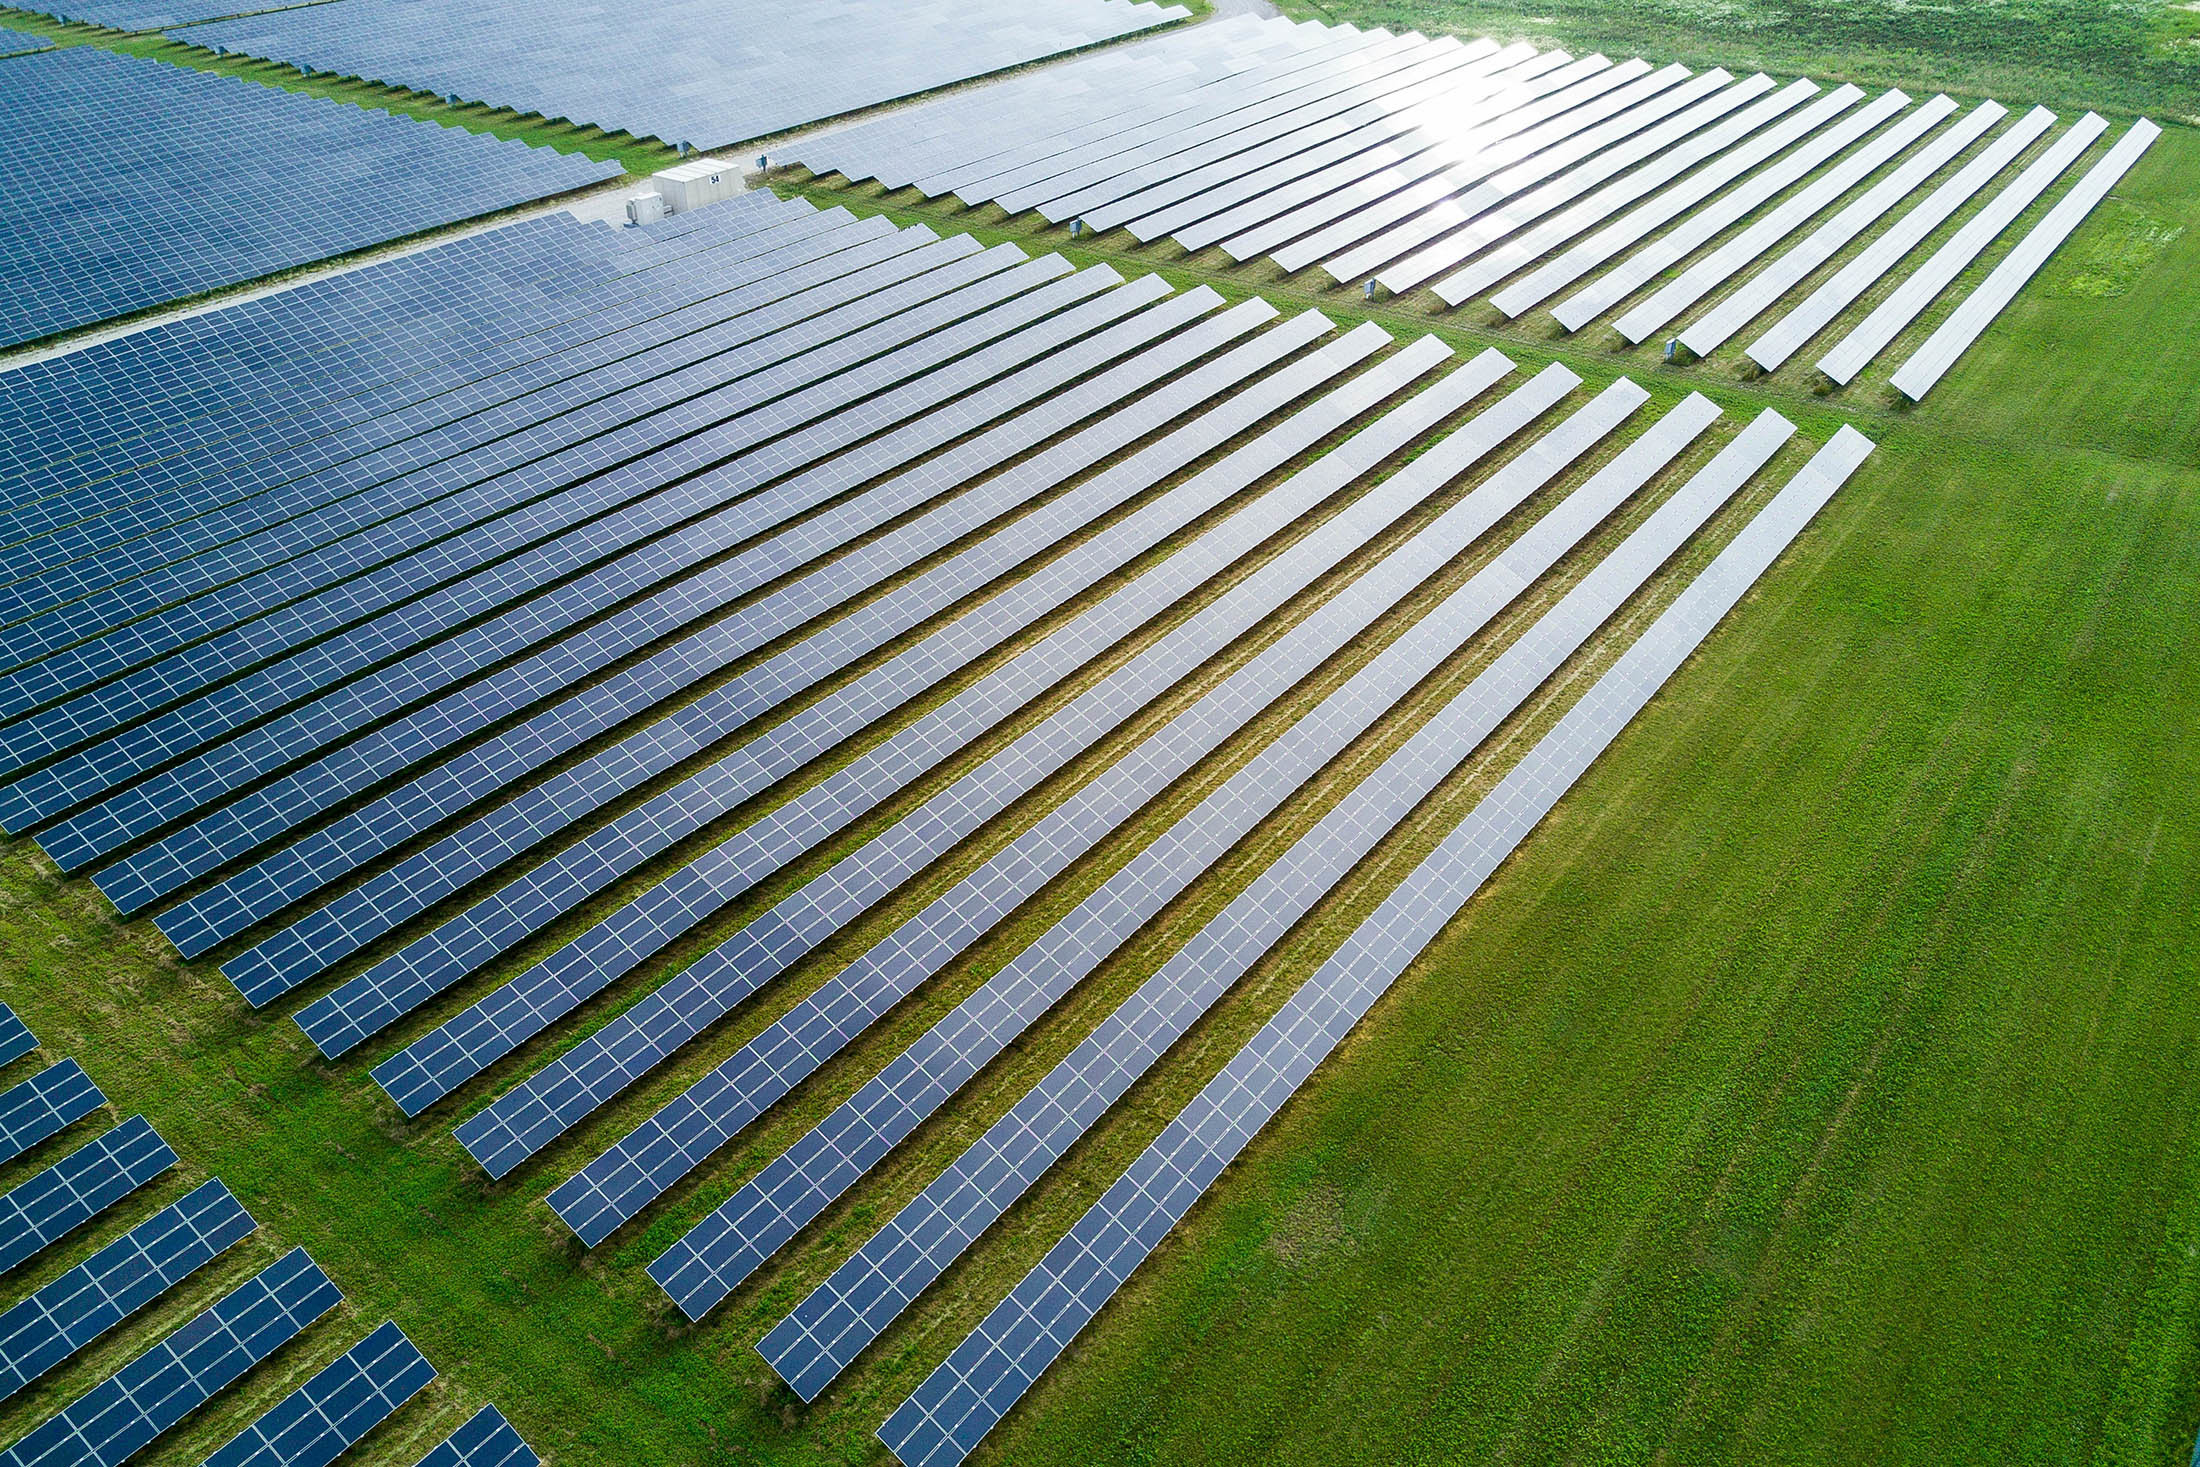 Solar outperforms wind on global scale Fitch says News for the 